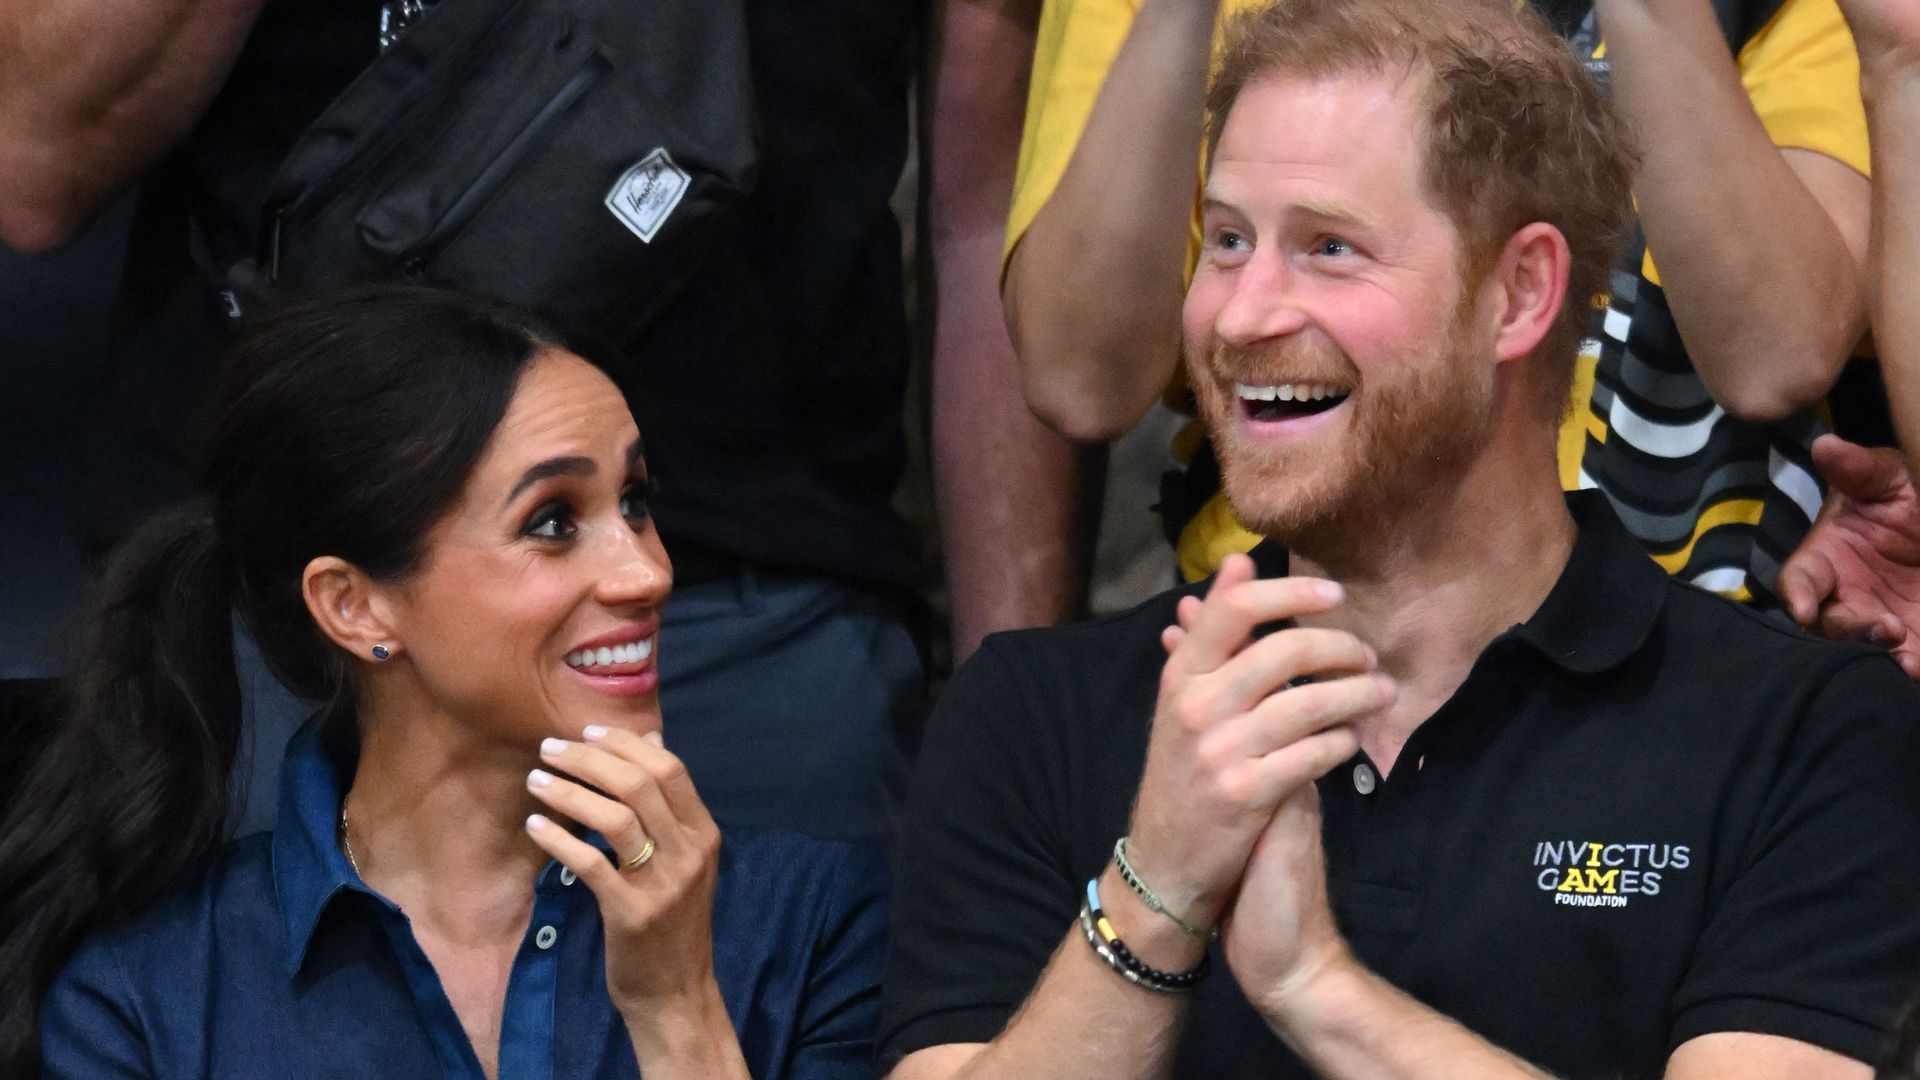 prince harry and meghan markle at invictus games 